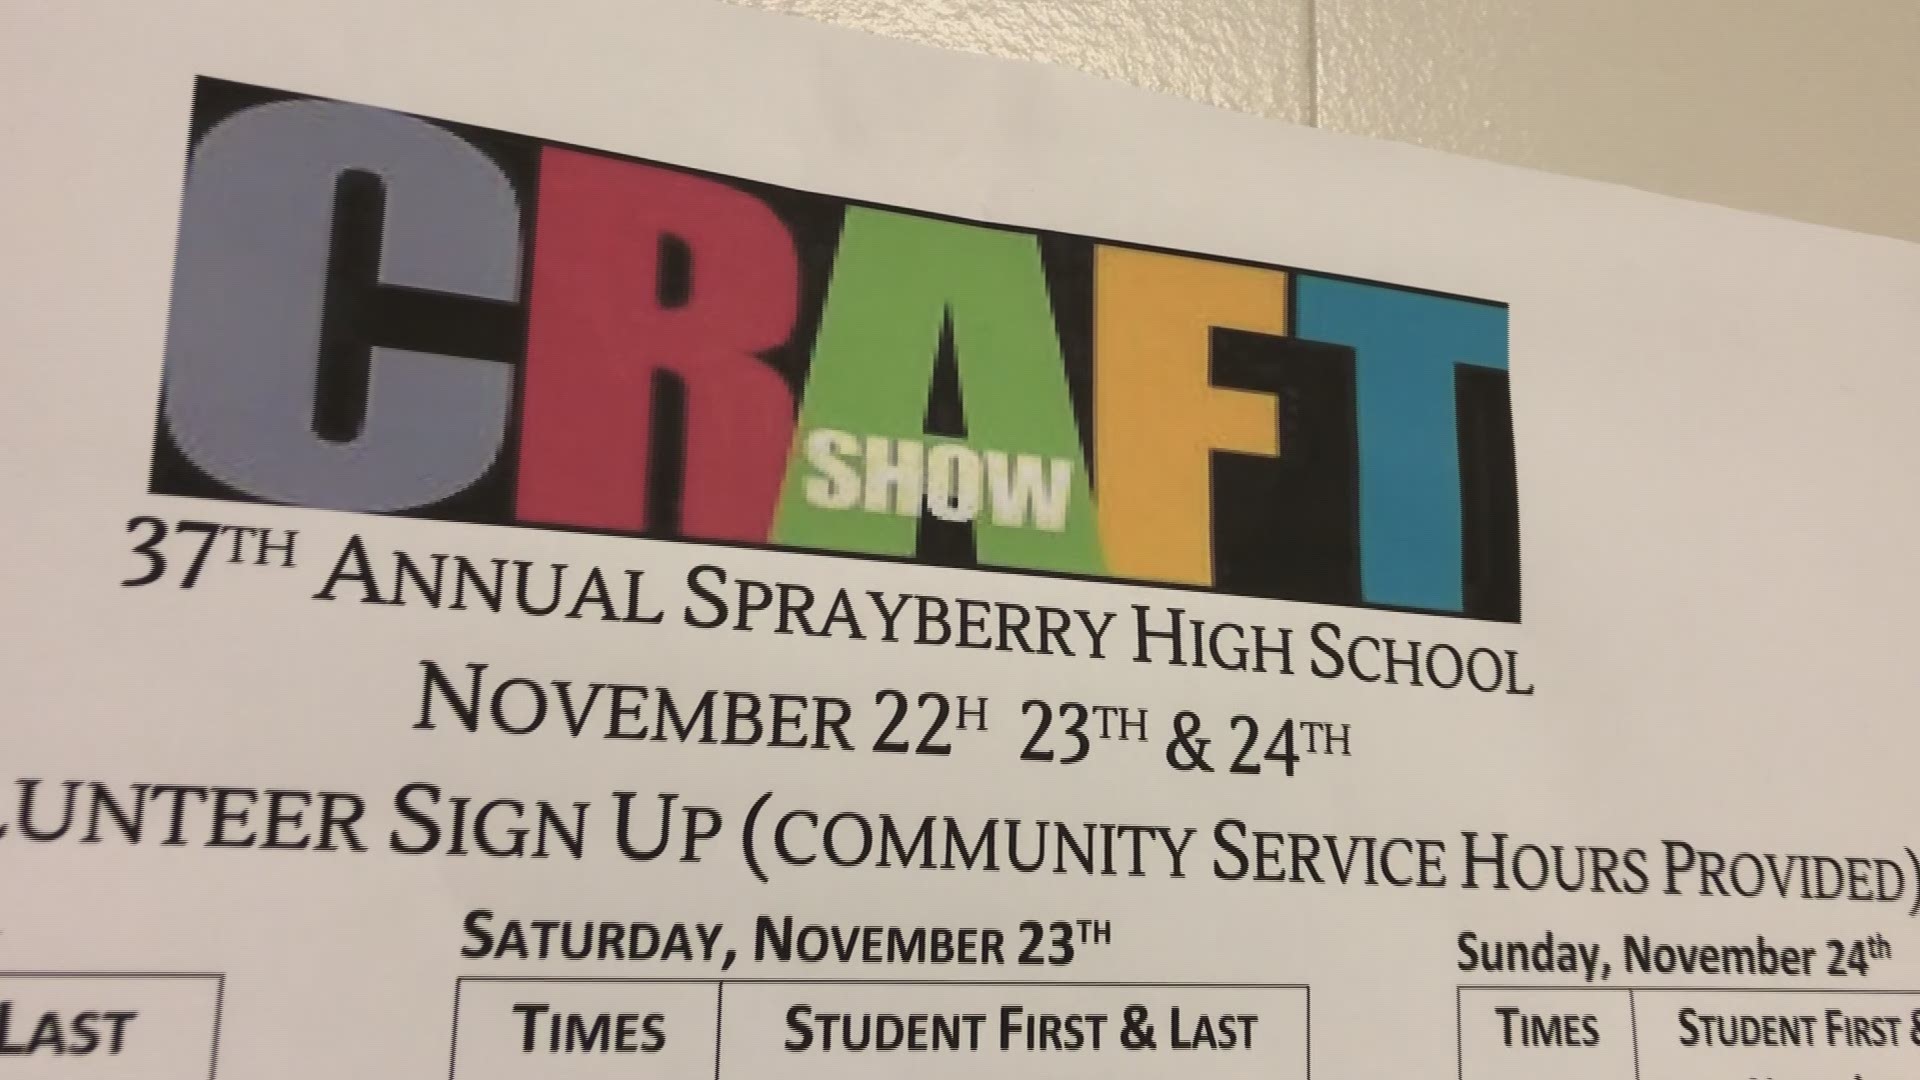 10K people expected at high school craft show